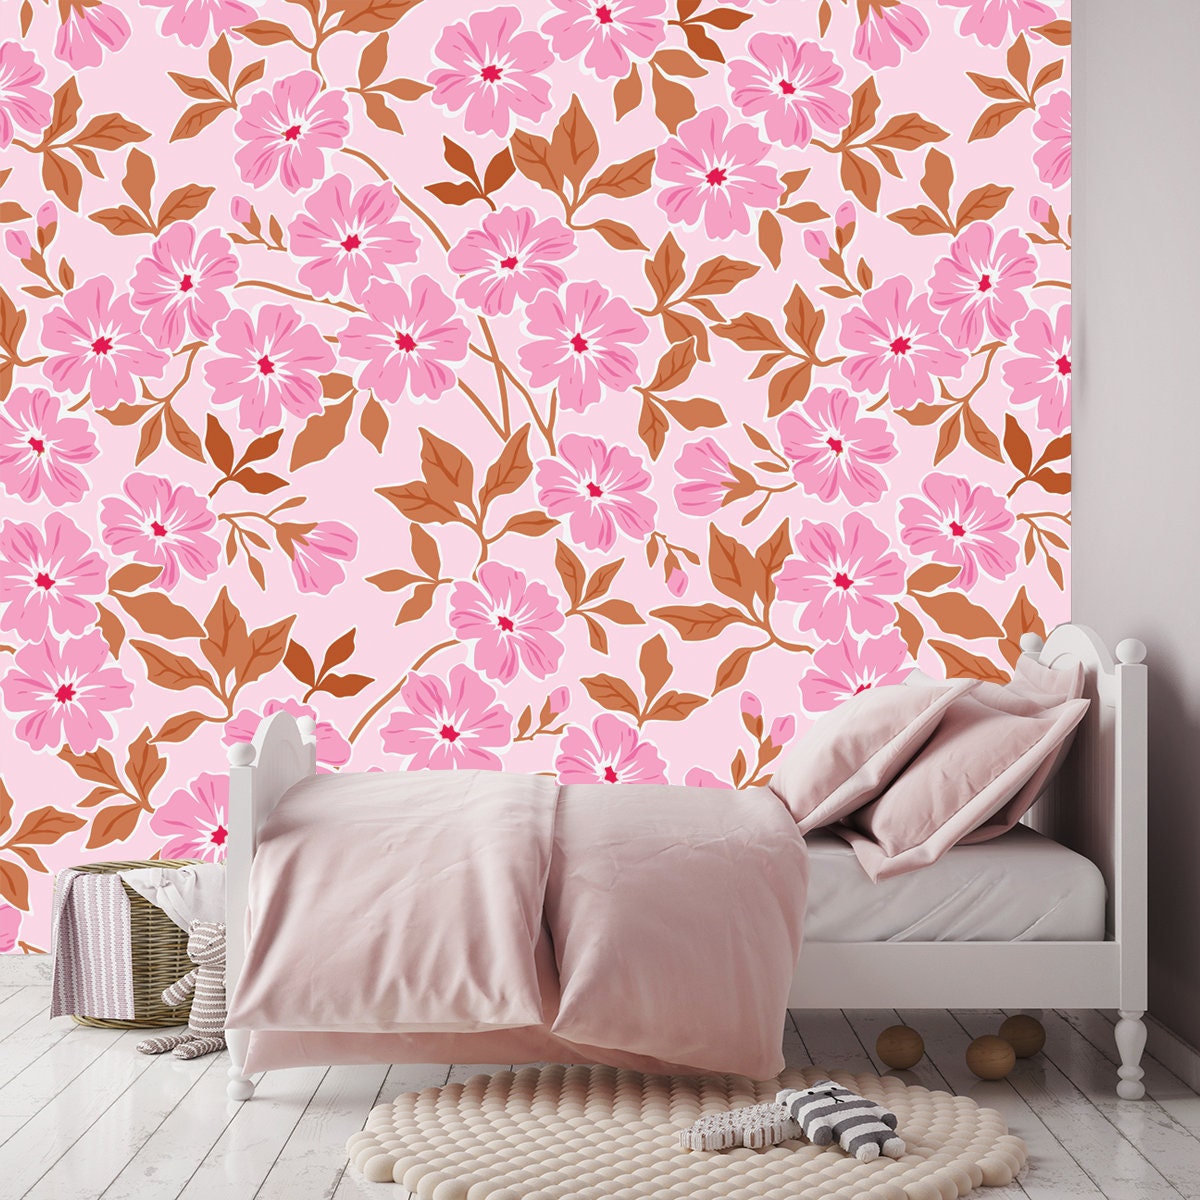 Trendy Seamless Vector Floral Pattern. Endless Print Made of Small Pink Flowers and Leaves Wallpaper Girl Bedroom Mural